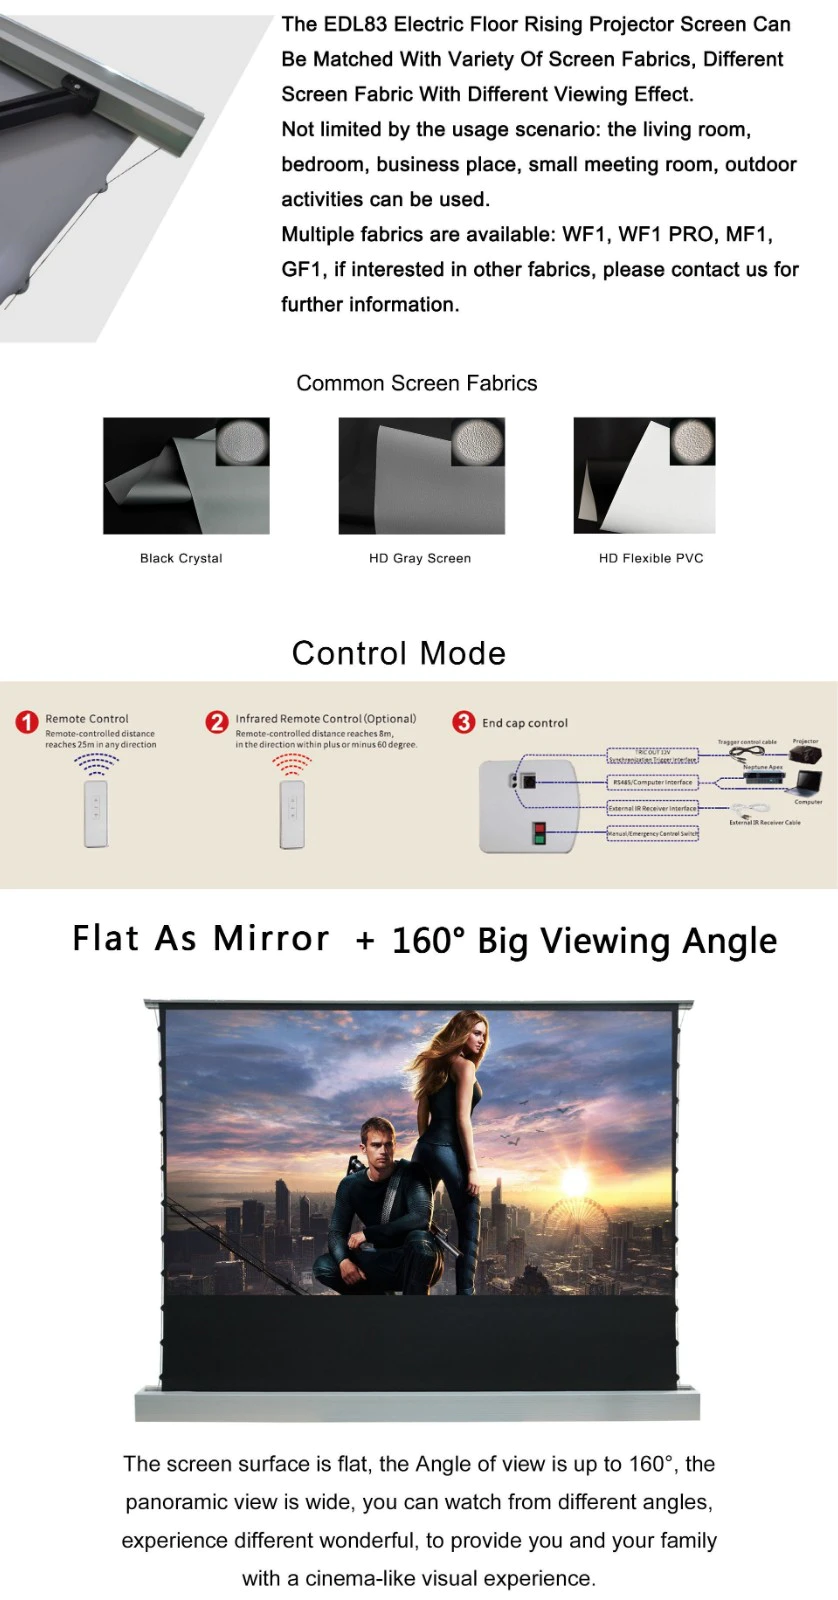 XY Screens manual pull up projector screen design for home